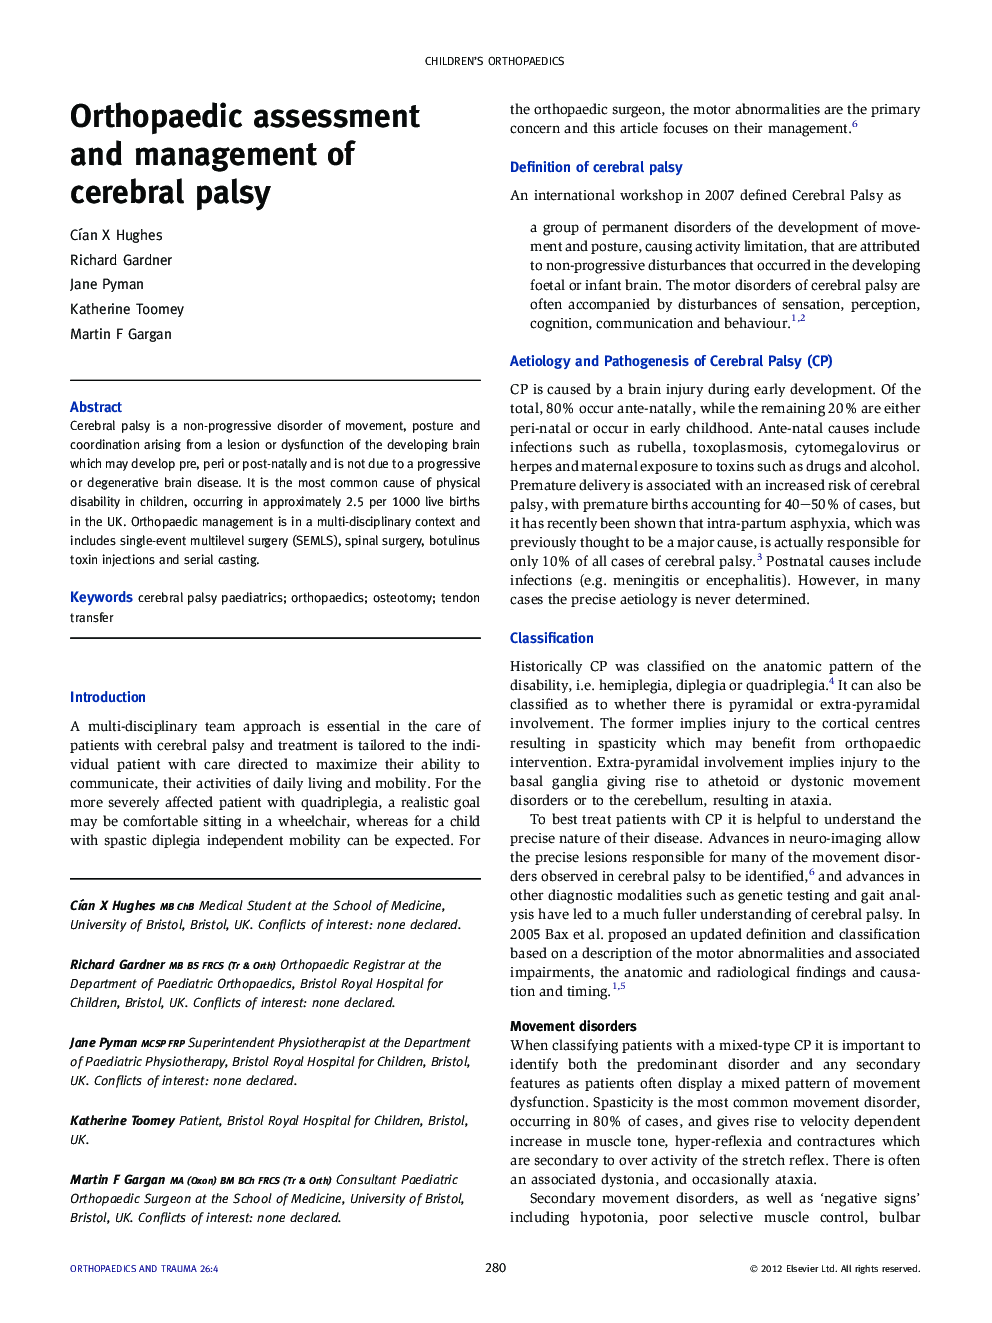 Orthopaedic assessment and management of cerebral palsy